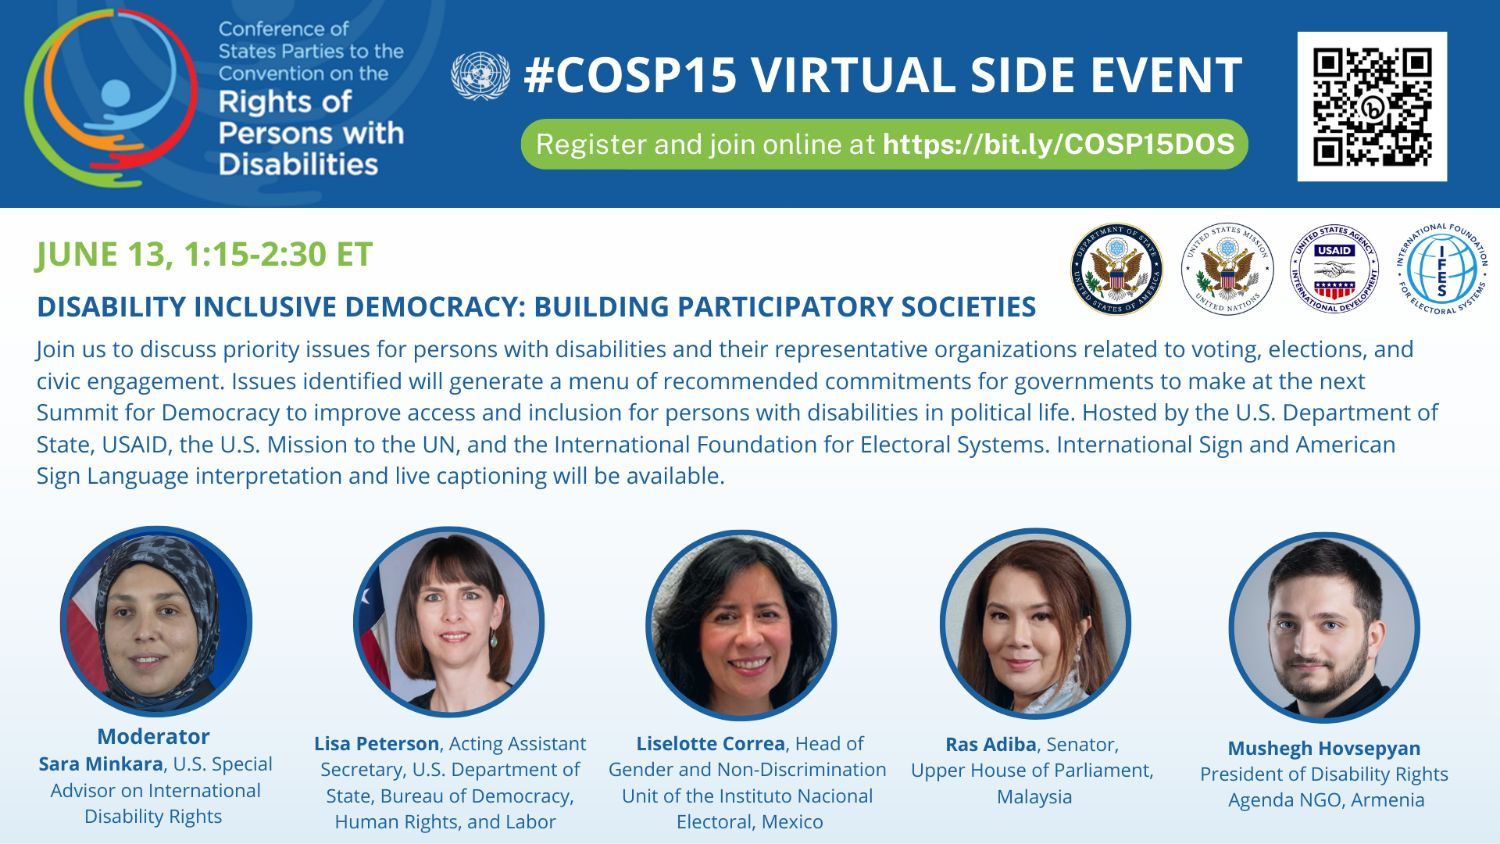 Event flyer for COSP15 virtual side event, June 13, 1:15-2:30pm EDT. Disability Inclusive Democracy: Building Participatory Societies Hosted by the US Department of State, USAID, the US Mission to the UN, and the International Foundation for Electoral Systems. International Sign and American Sign Language interpretation and live captioning will be available. Moderator: Sara Minkara, US Special Advisor on International Disability Rights Speakers: Lisa Peterson, Acting Assistant Secretary, US Department of State, Buruea of Democracy, Human Rights, & Labor Liselotte Correa, Head of Gender and Non-Discrimination Unit of the Instituto Nacional Electoral, Mexico Ras Adiba, Senator, Upper House of Parliament, Malaysia